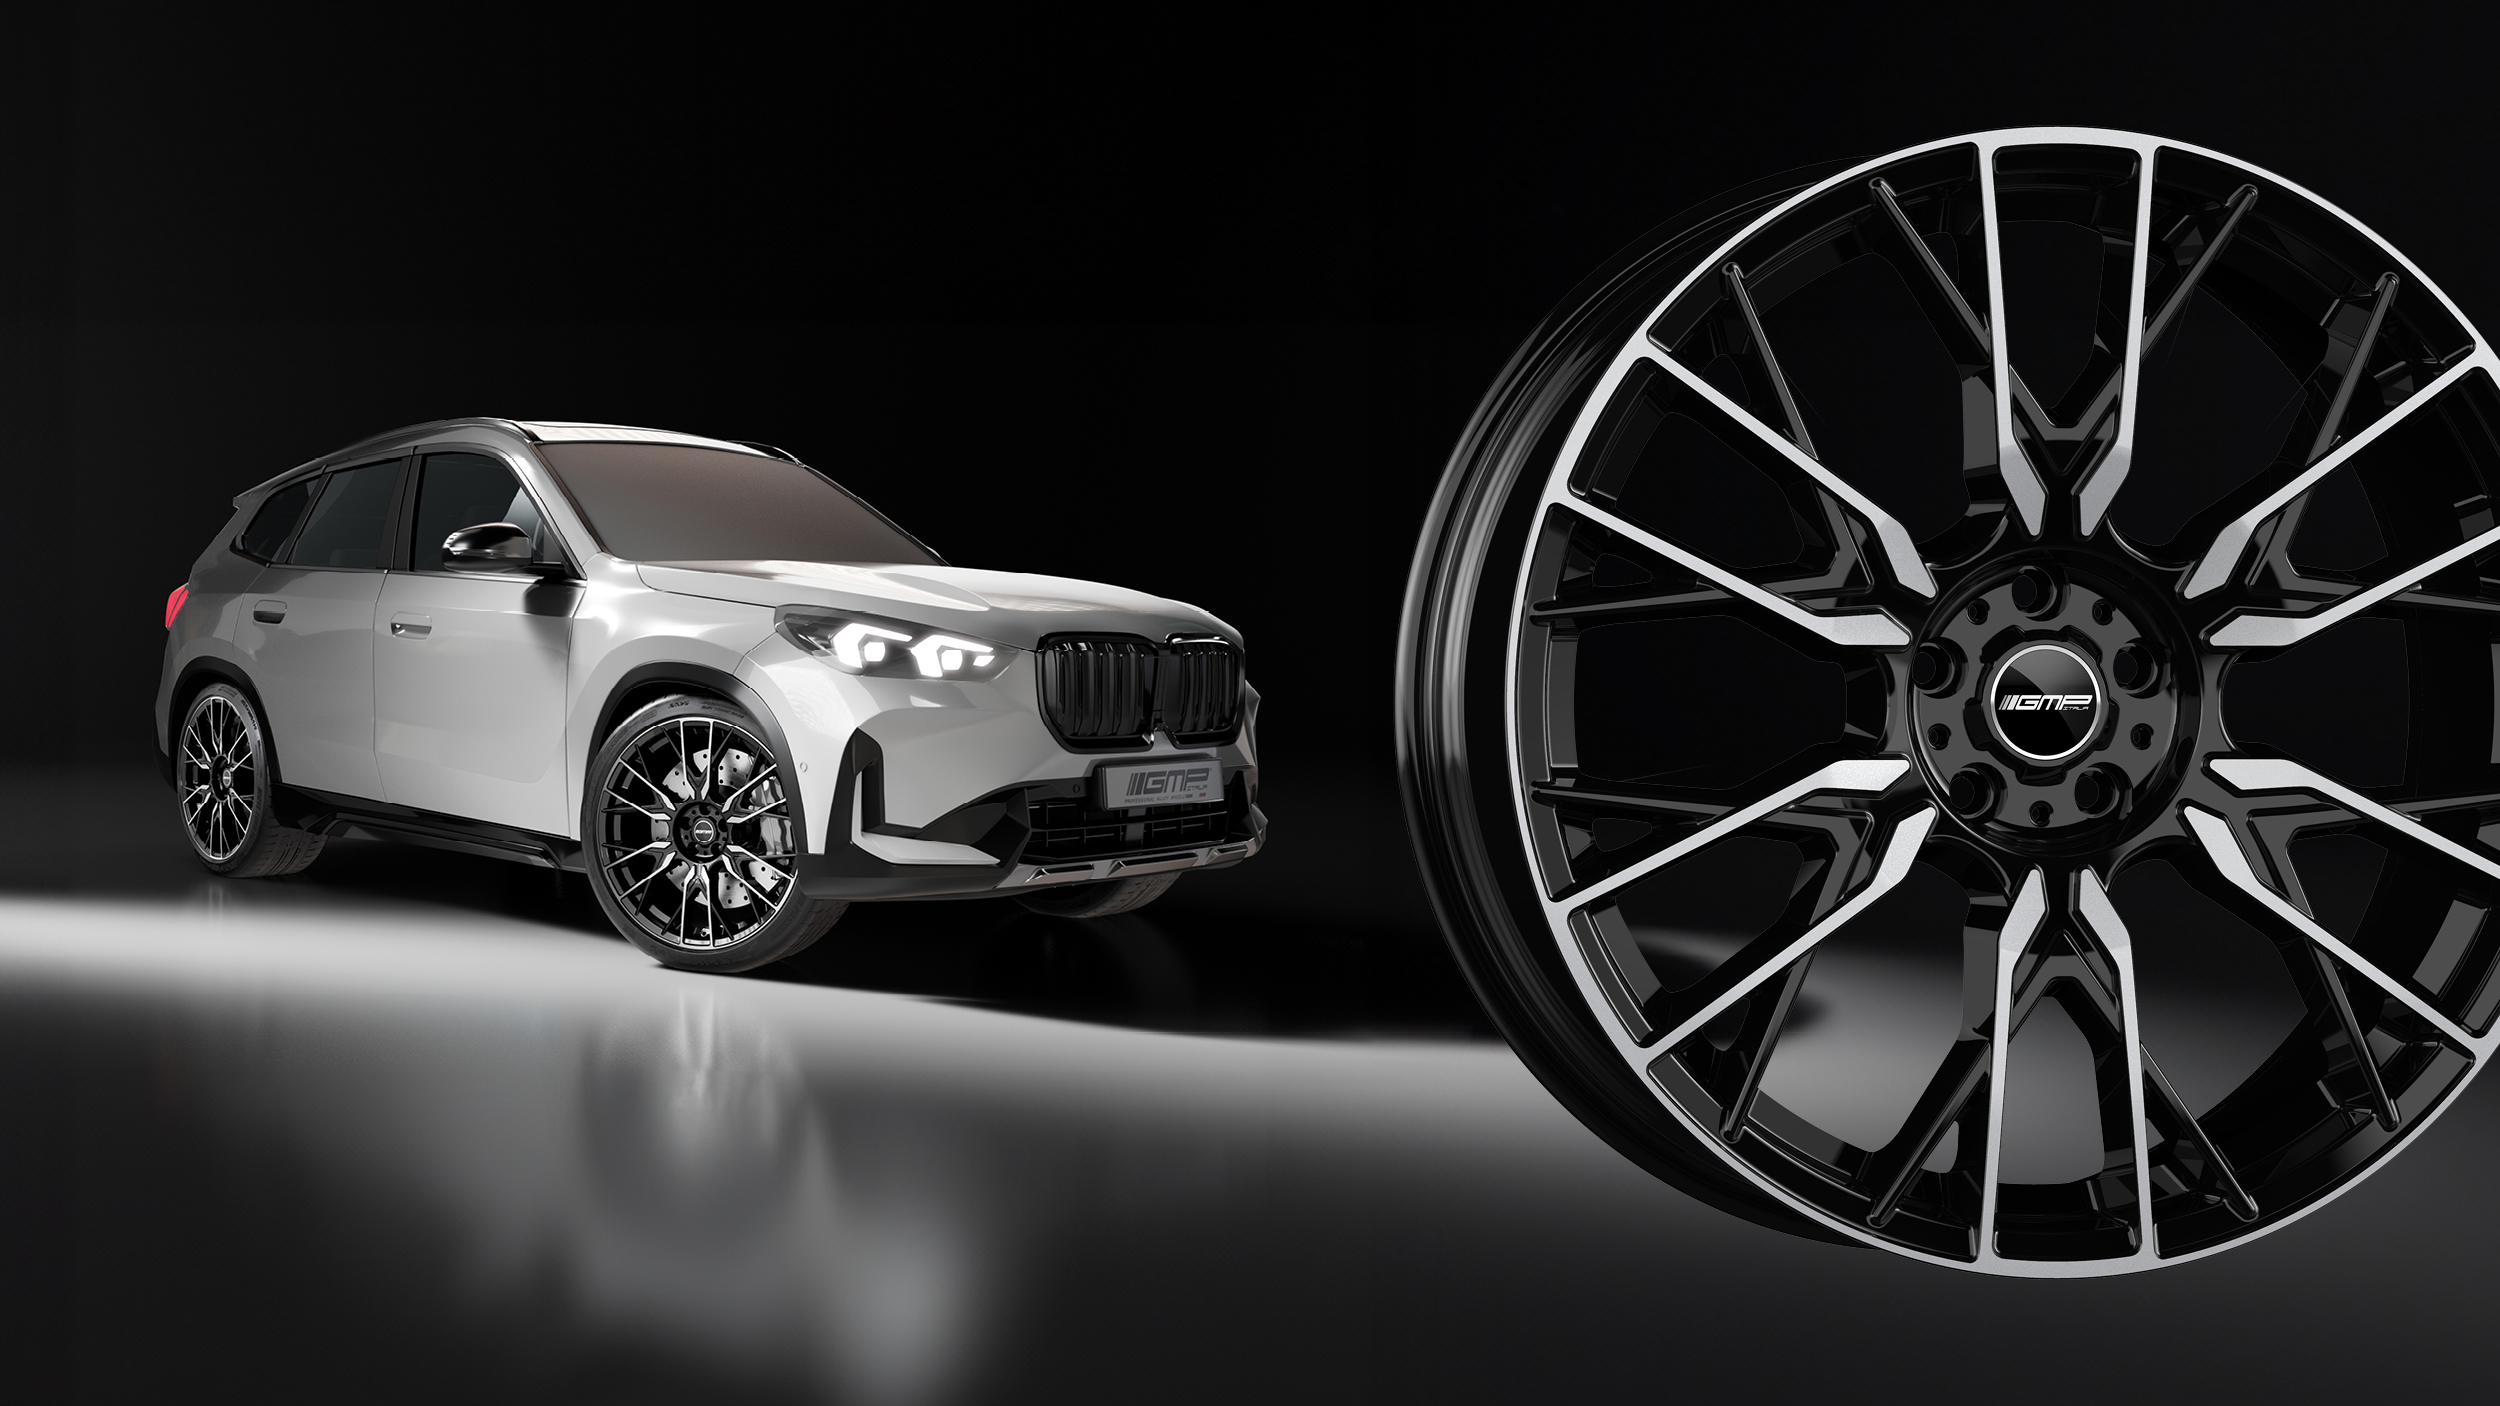 Production of alloy wheels for your car